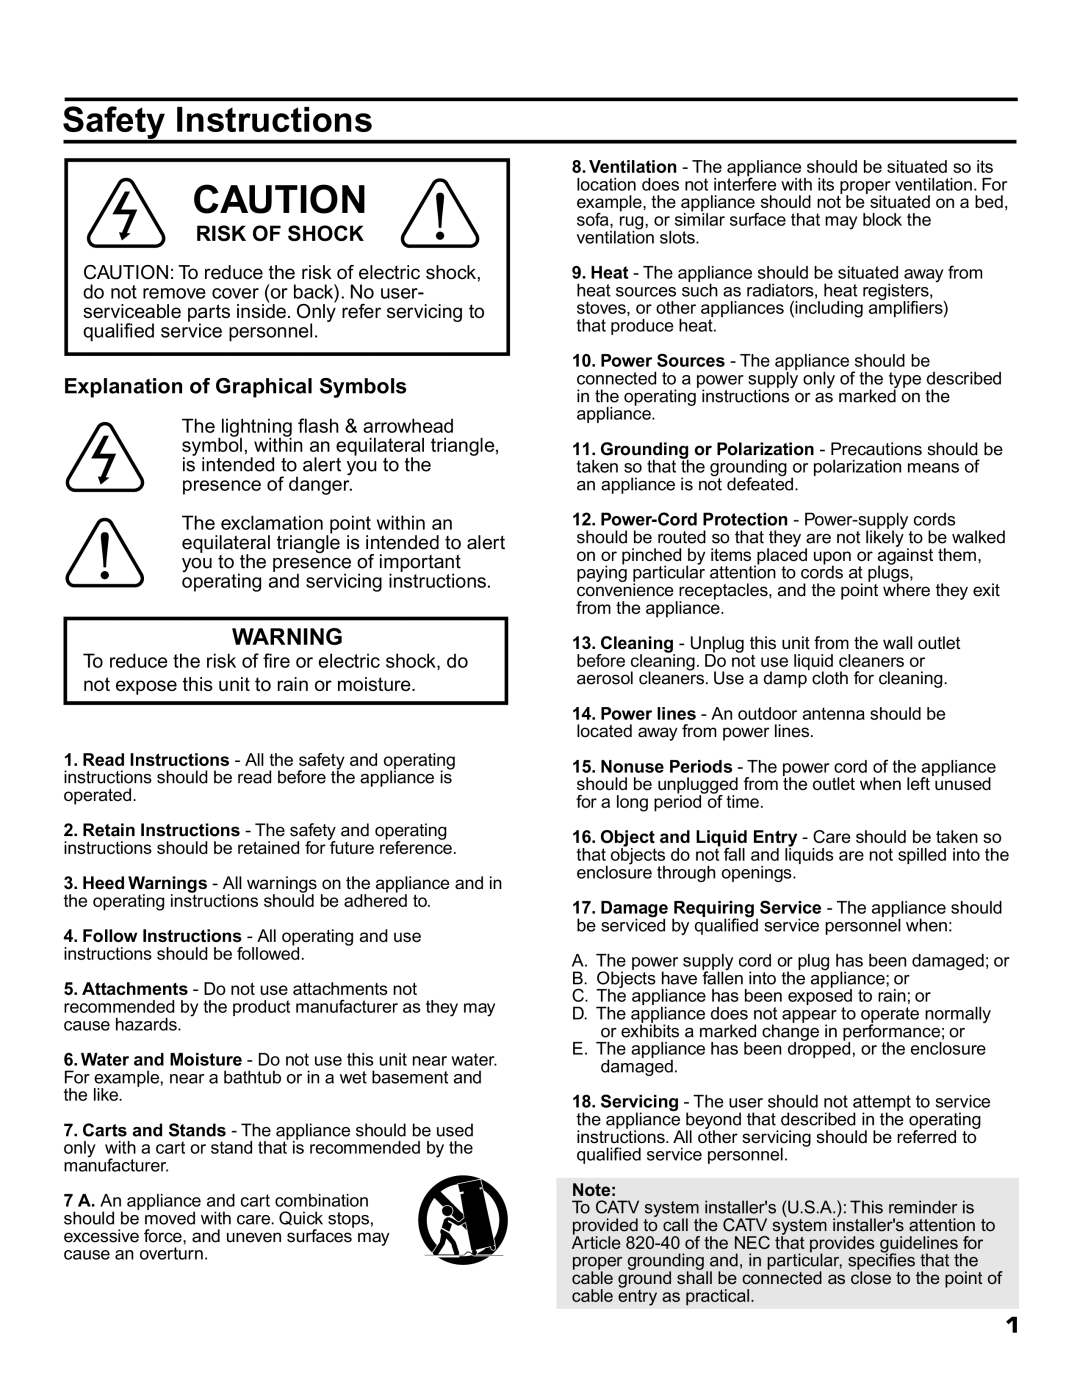 VocoPro SUB-1500 owner manual Safety Instructions, Risk Of Shock, Explanation of Graphical Symbols 